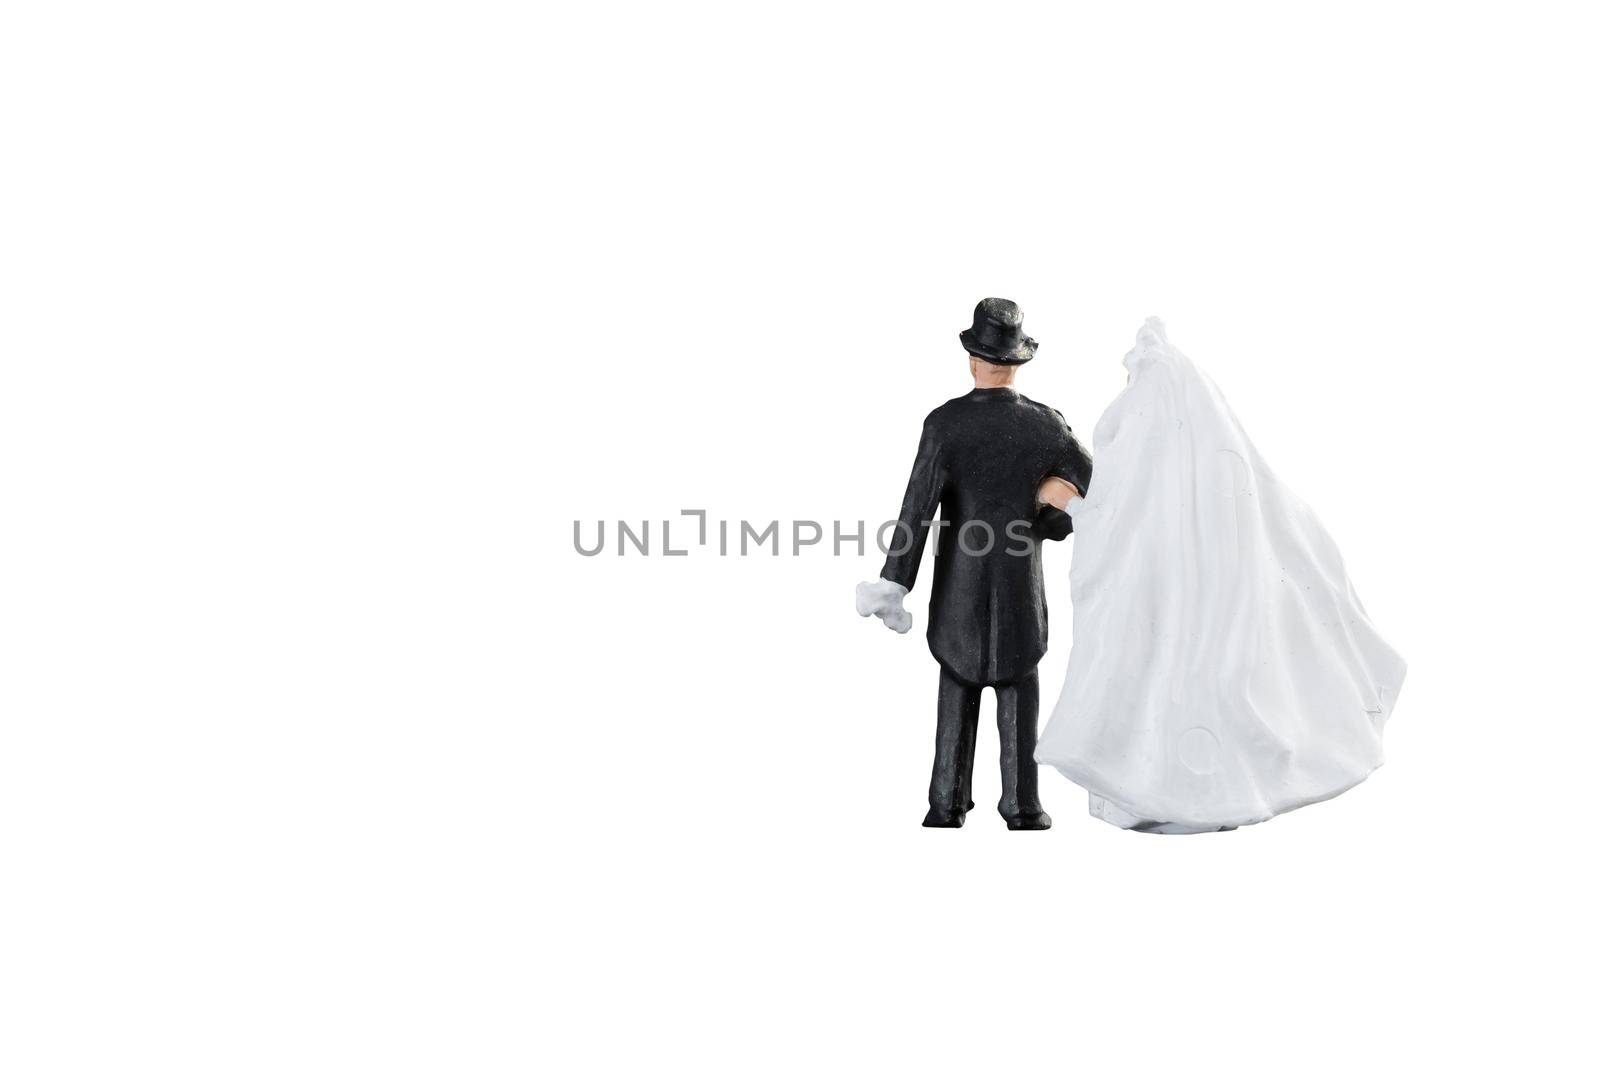 Close up of Miniature people wedding bride and groom couple isolated with clipping path on white background.Elegant Design with copy space for placement your text, mock up for love and wedding concept